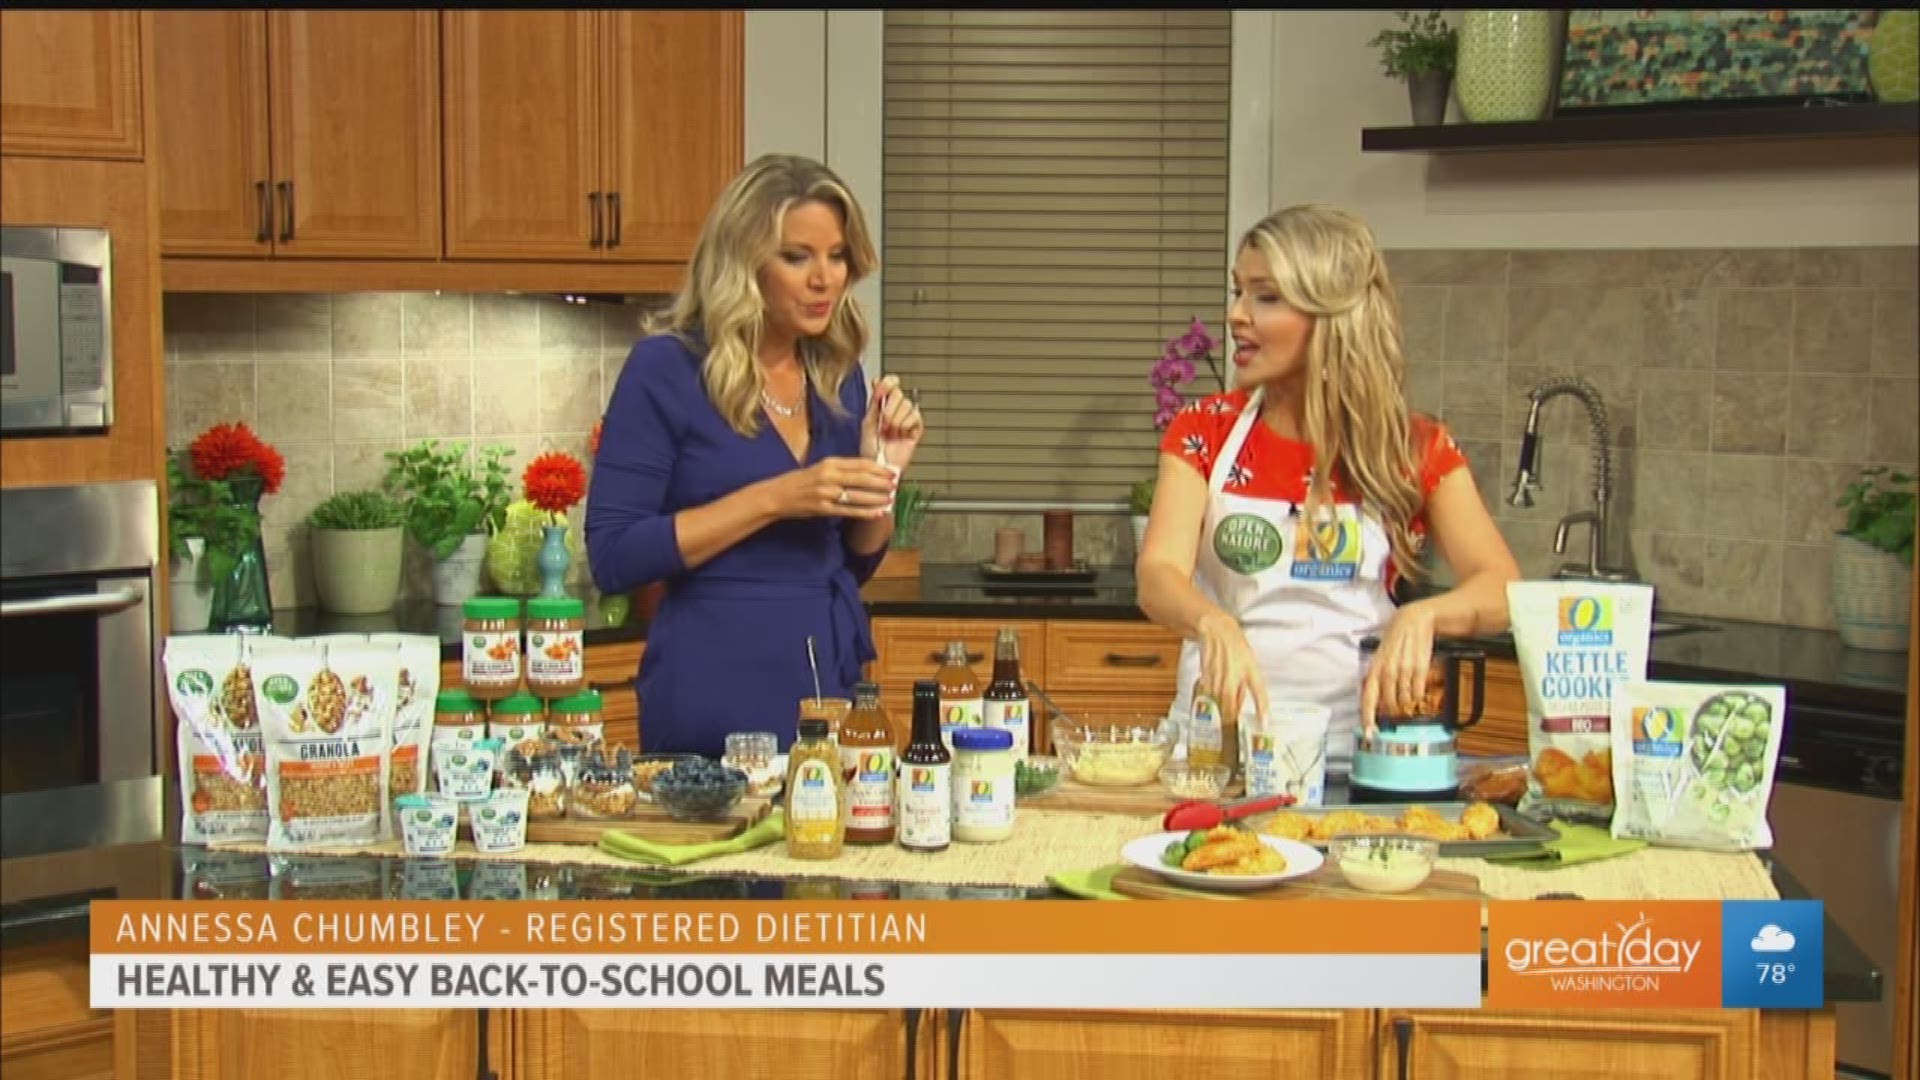 Registered Dietitian Annessa Chumbley has whipped up some exciting and healthy back-to-school recipes that kids and parents alike will love. Using high-quality, affordable Open Nature products which are free from artificial flavors and preservatives and USDA certified organic items from O Organics, found exclusively at Safeway, making a quick and tasty meal for the whole family has never been easier.  This segment is sponsored by Safeway.